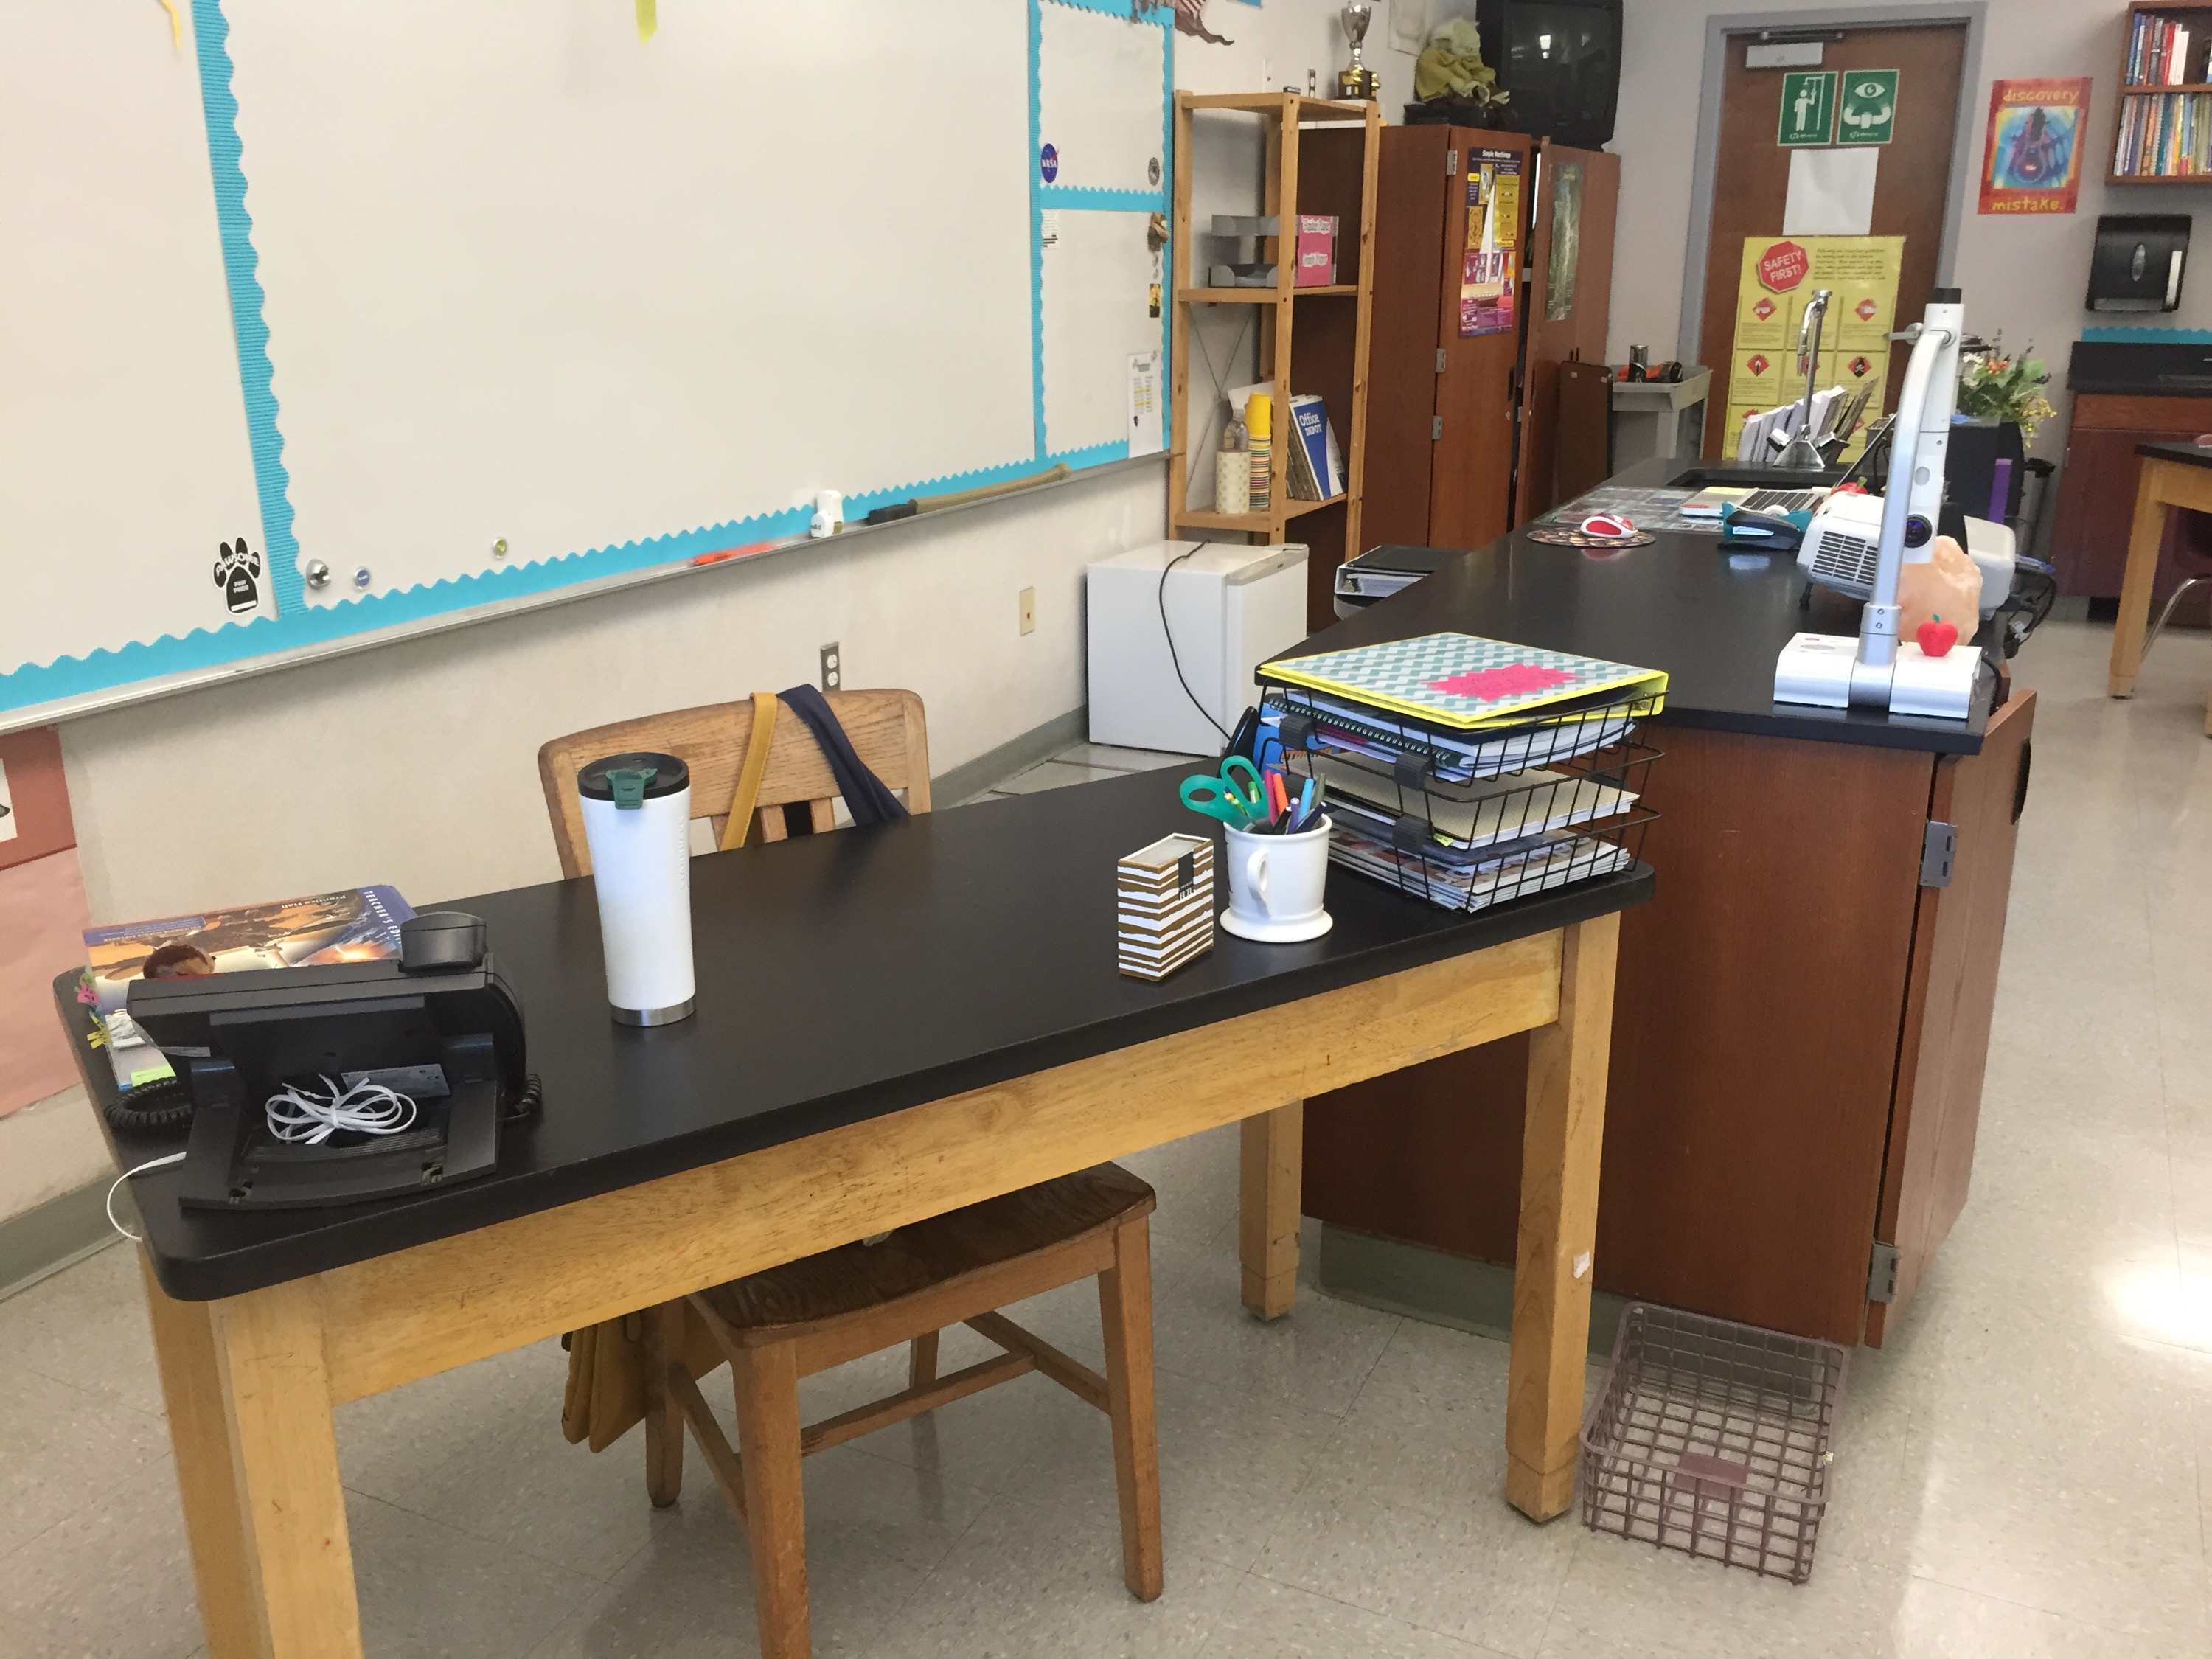 Check out these updates to my secondary Science classroom! www.theardentteacher.com